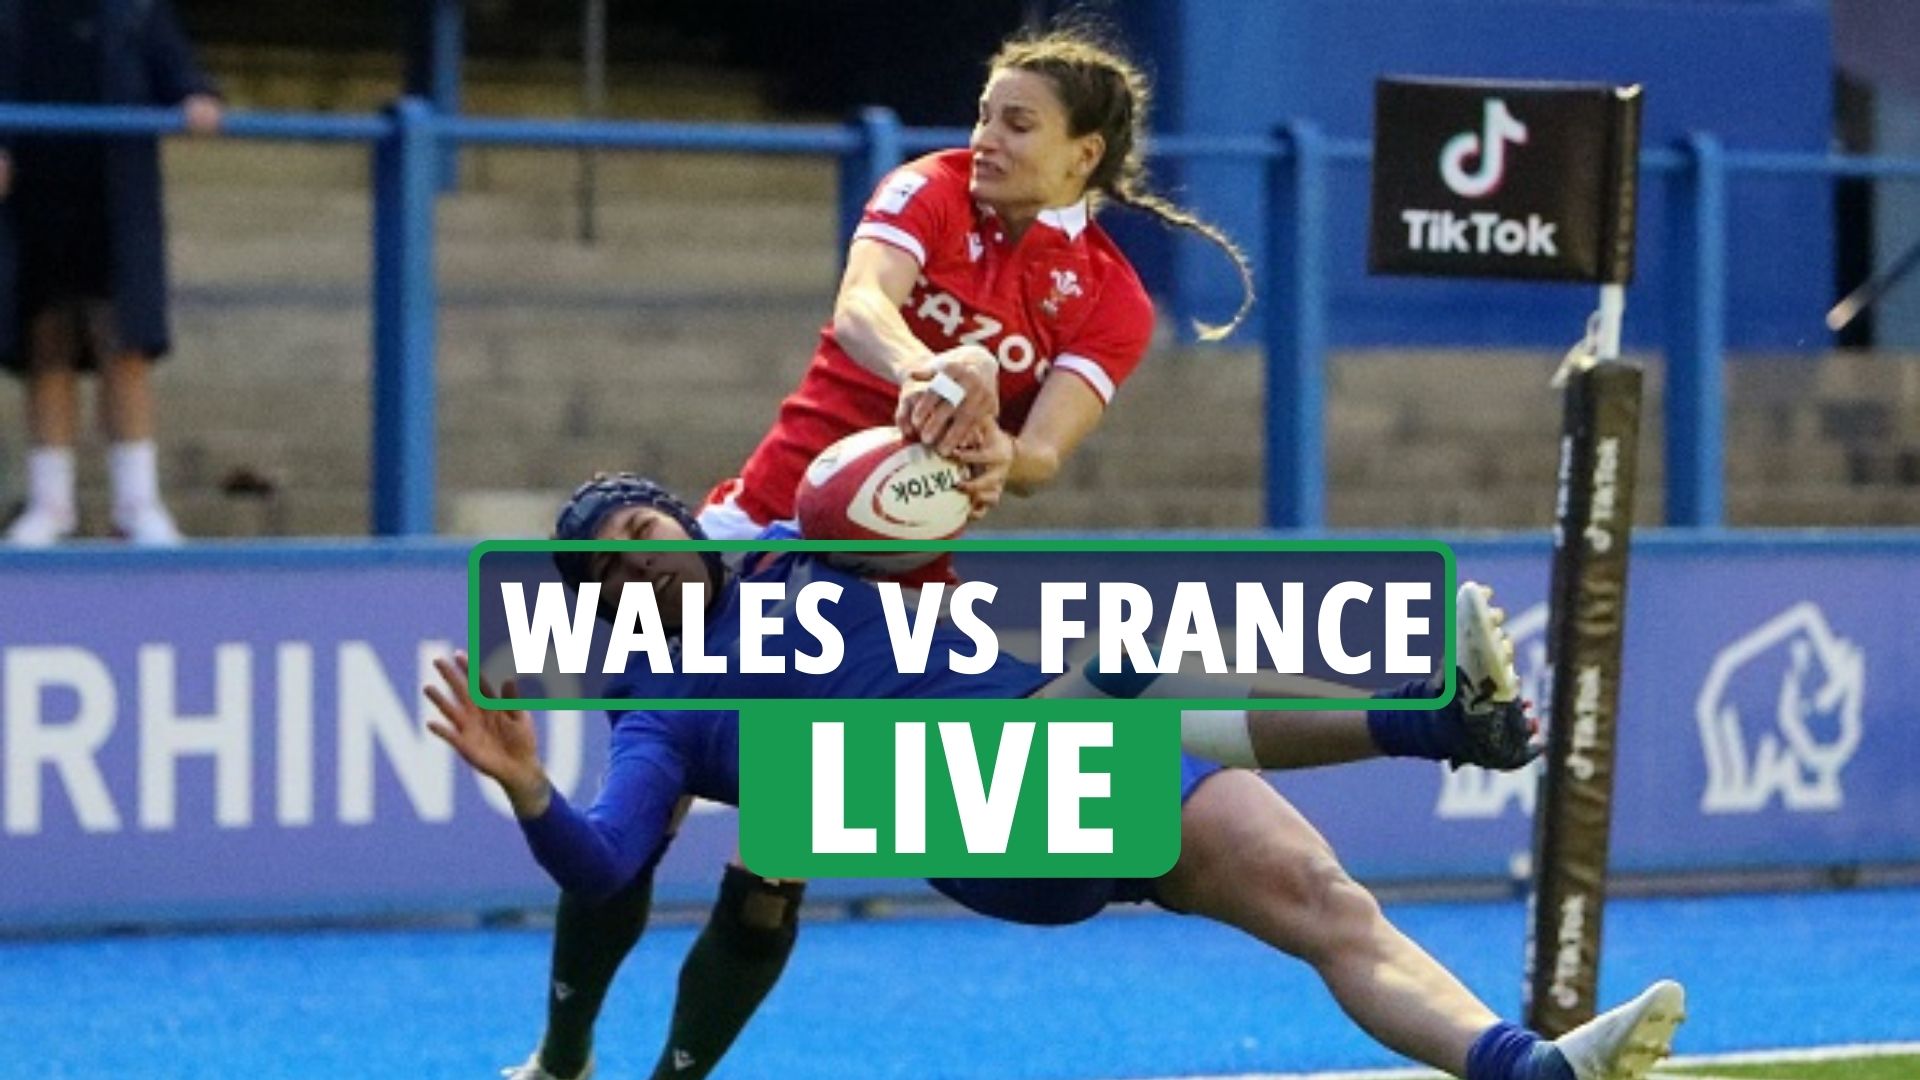 Wales vs France: TV channel, live stream, kick-off time and team news